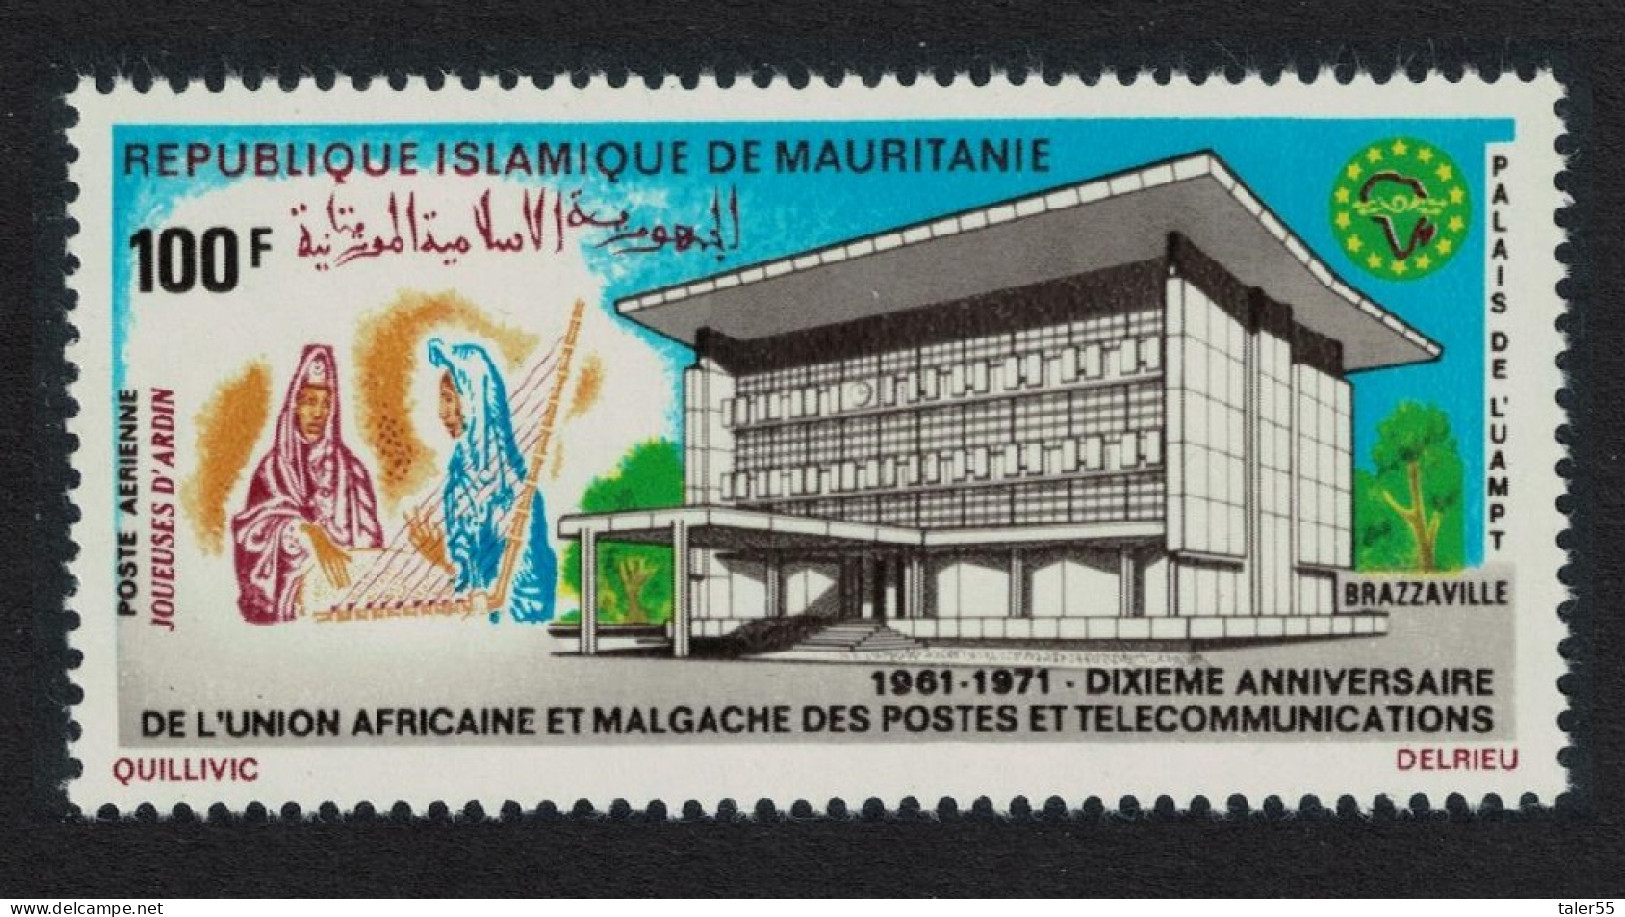 Mauritania African And Malagasy Posts And Telecommunications Union 1971 MNH SG#392 - Mauritania (1960-...)